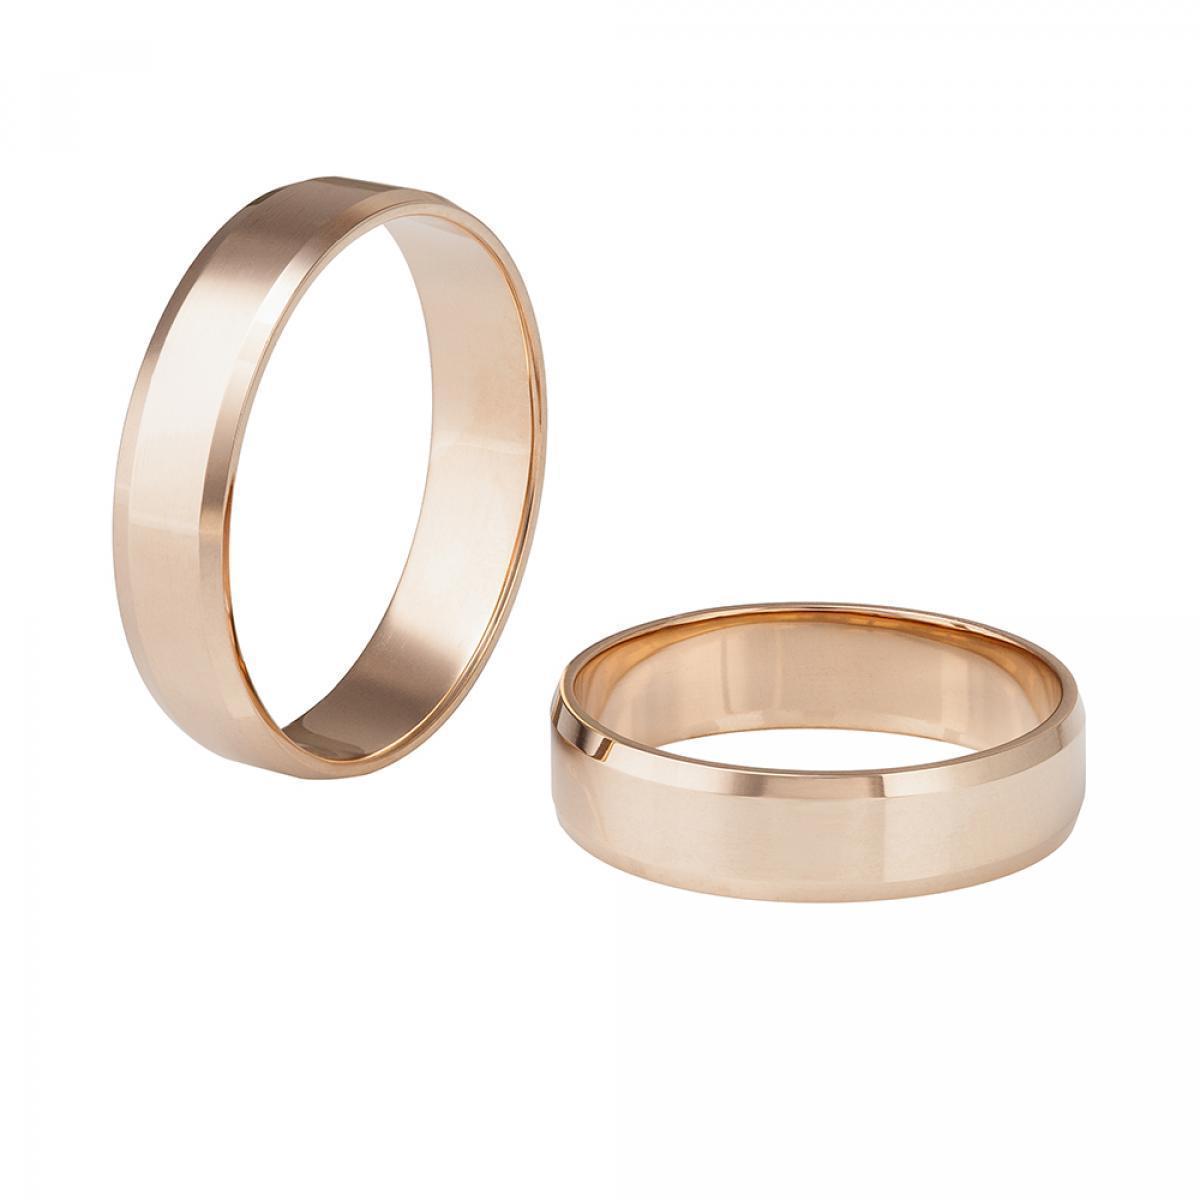 Modern Wedding Band/Ring in 14K/585 Rose Gold – Sapphire Jewellery